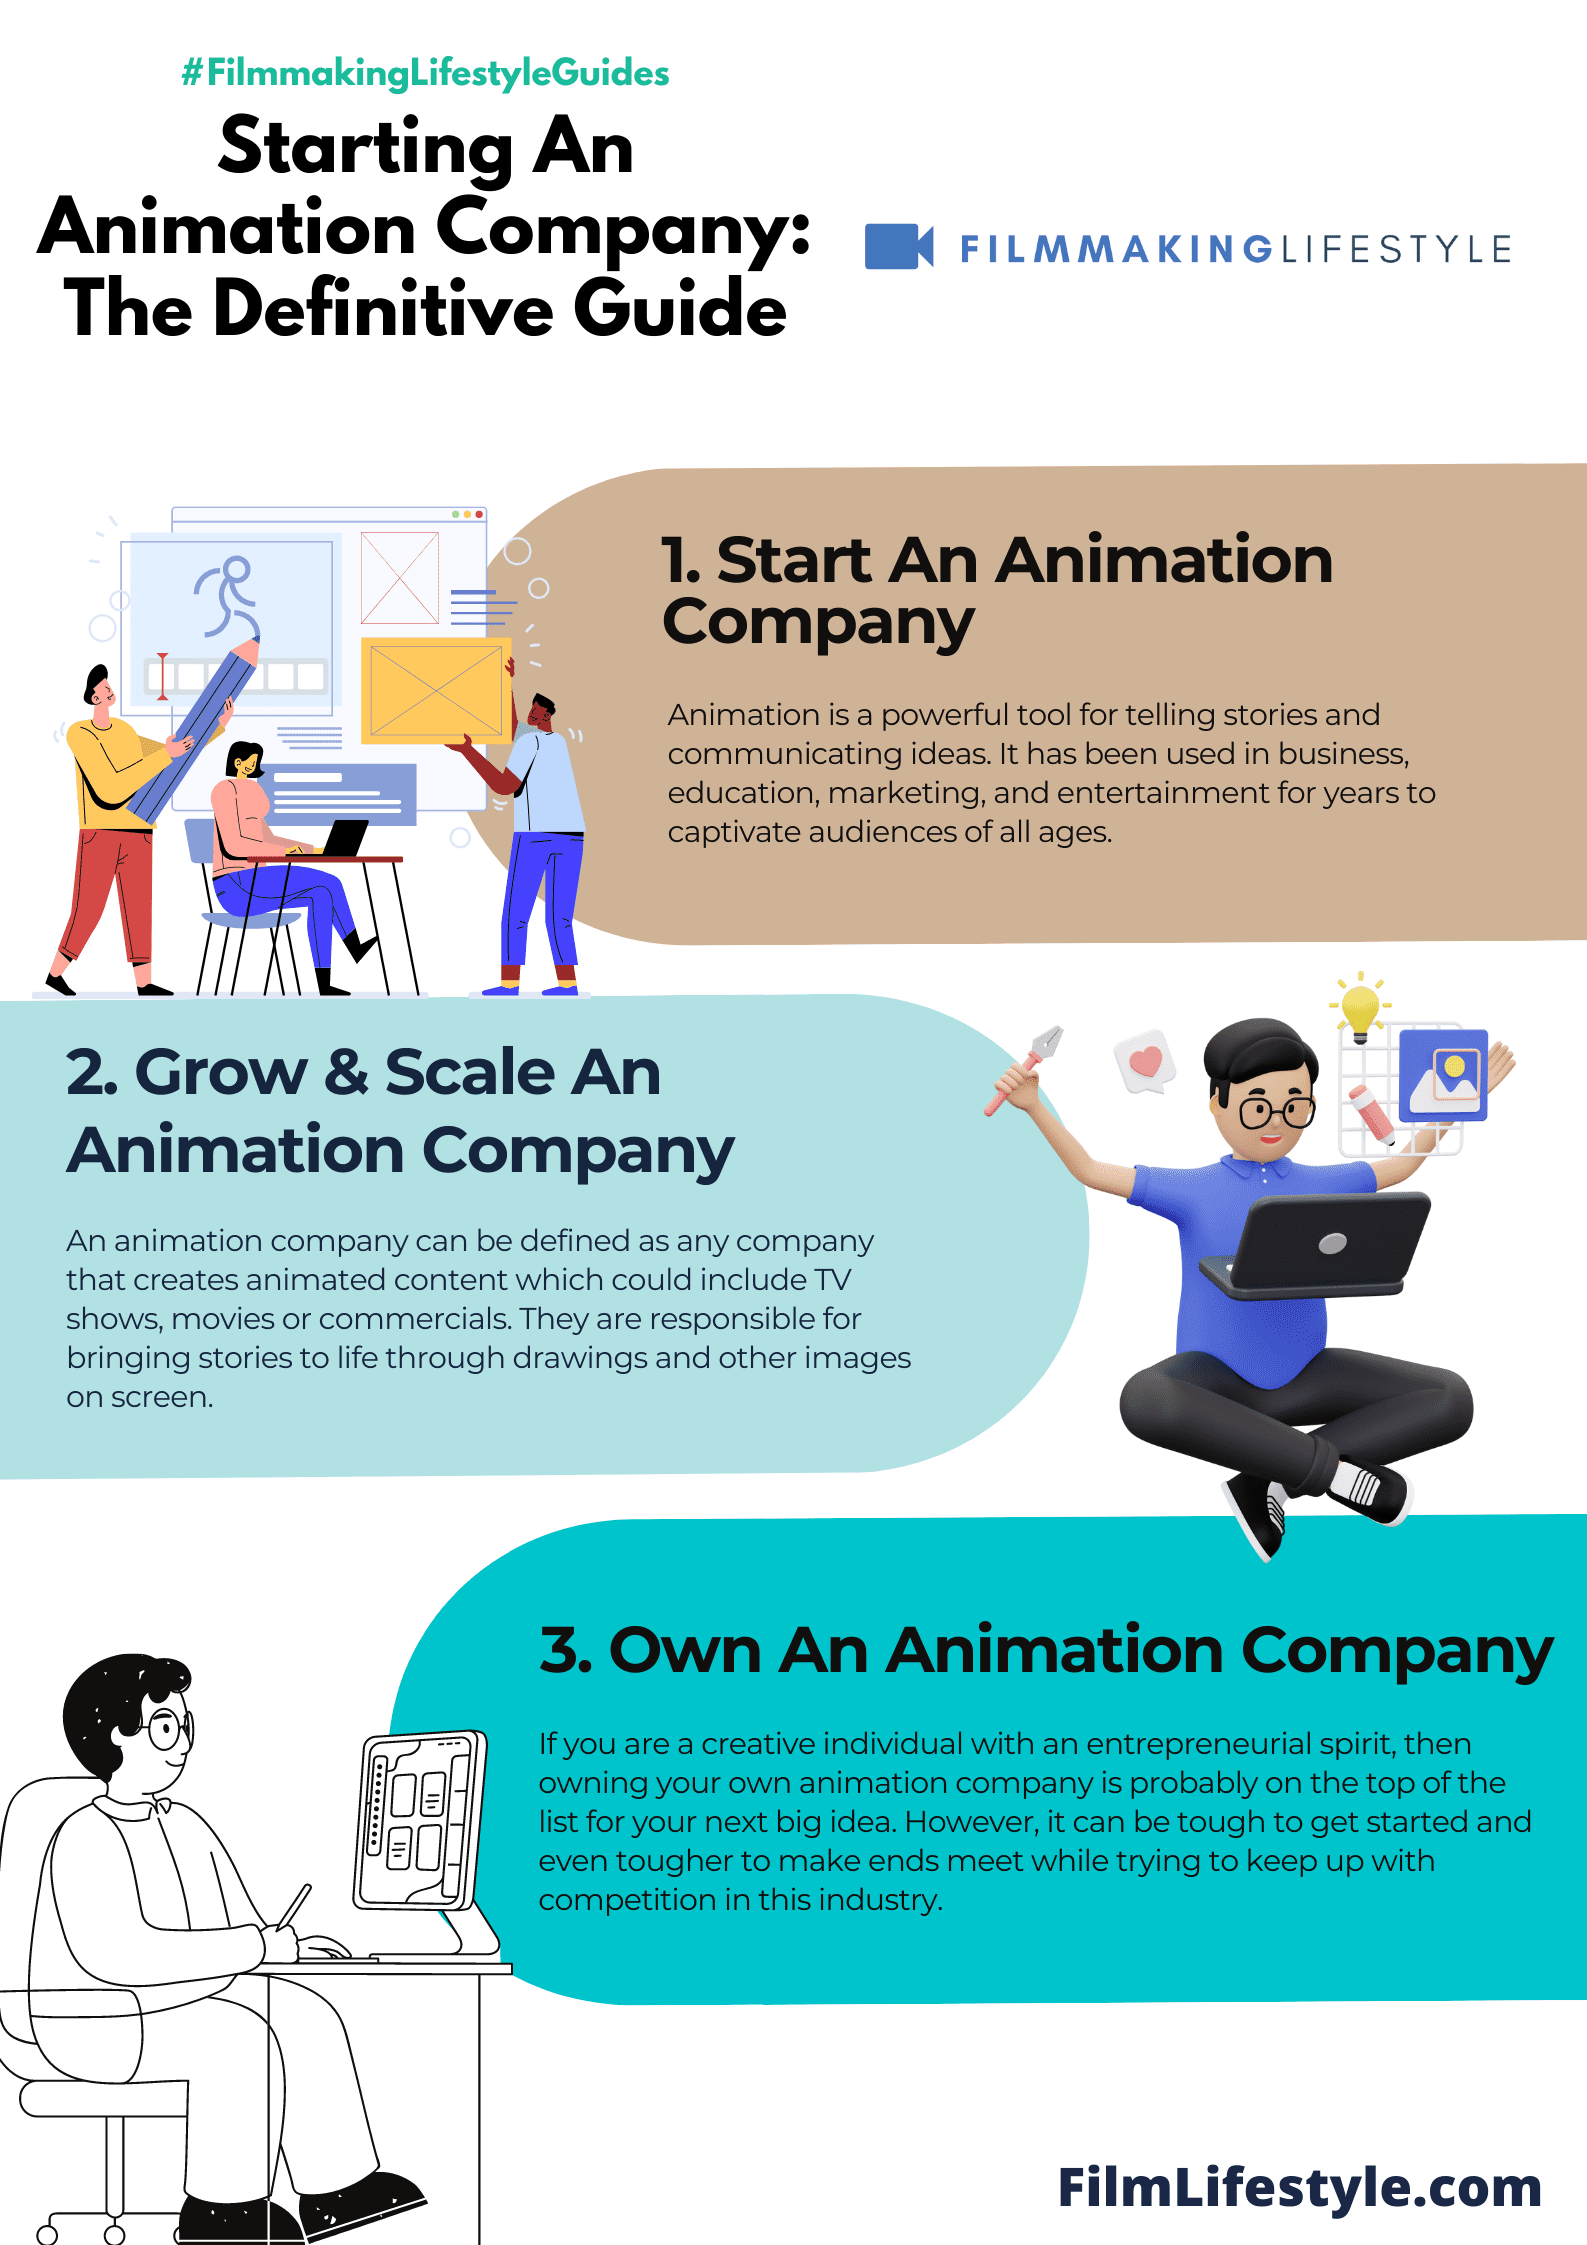 Starting An Animation Company